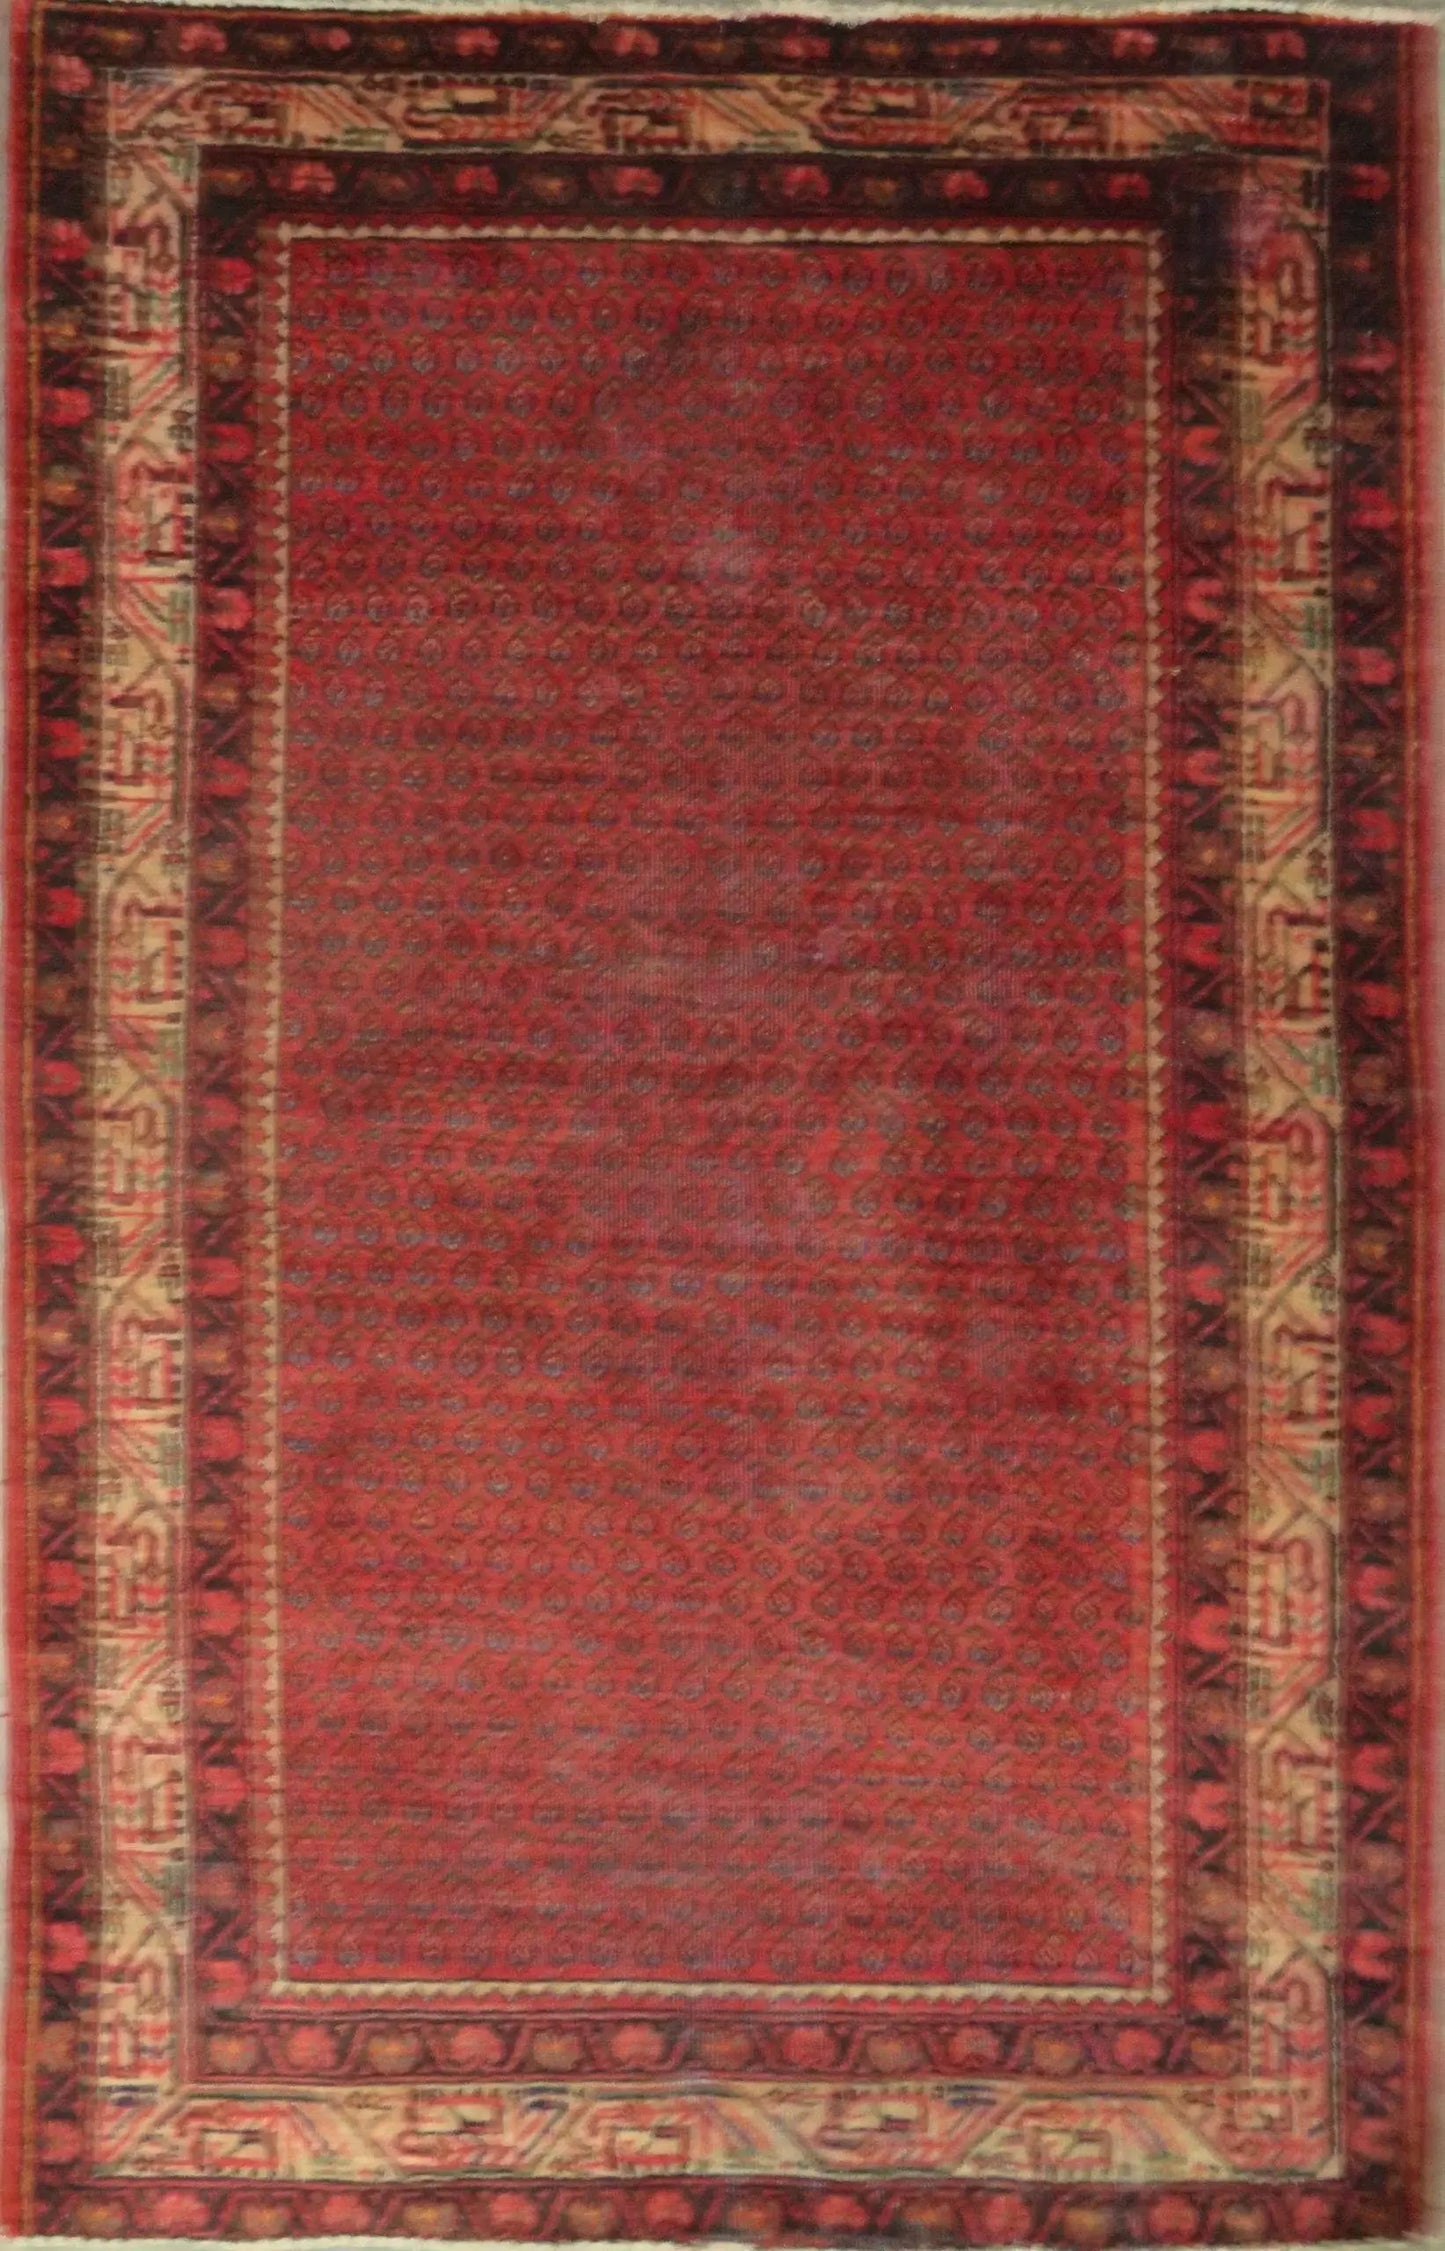 Hand-Knotted Persian Wool Rug _ Luxurious Vintage Design, 6'6" x 4'3", Artisan Crafted